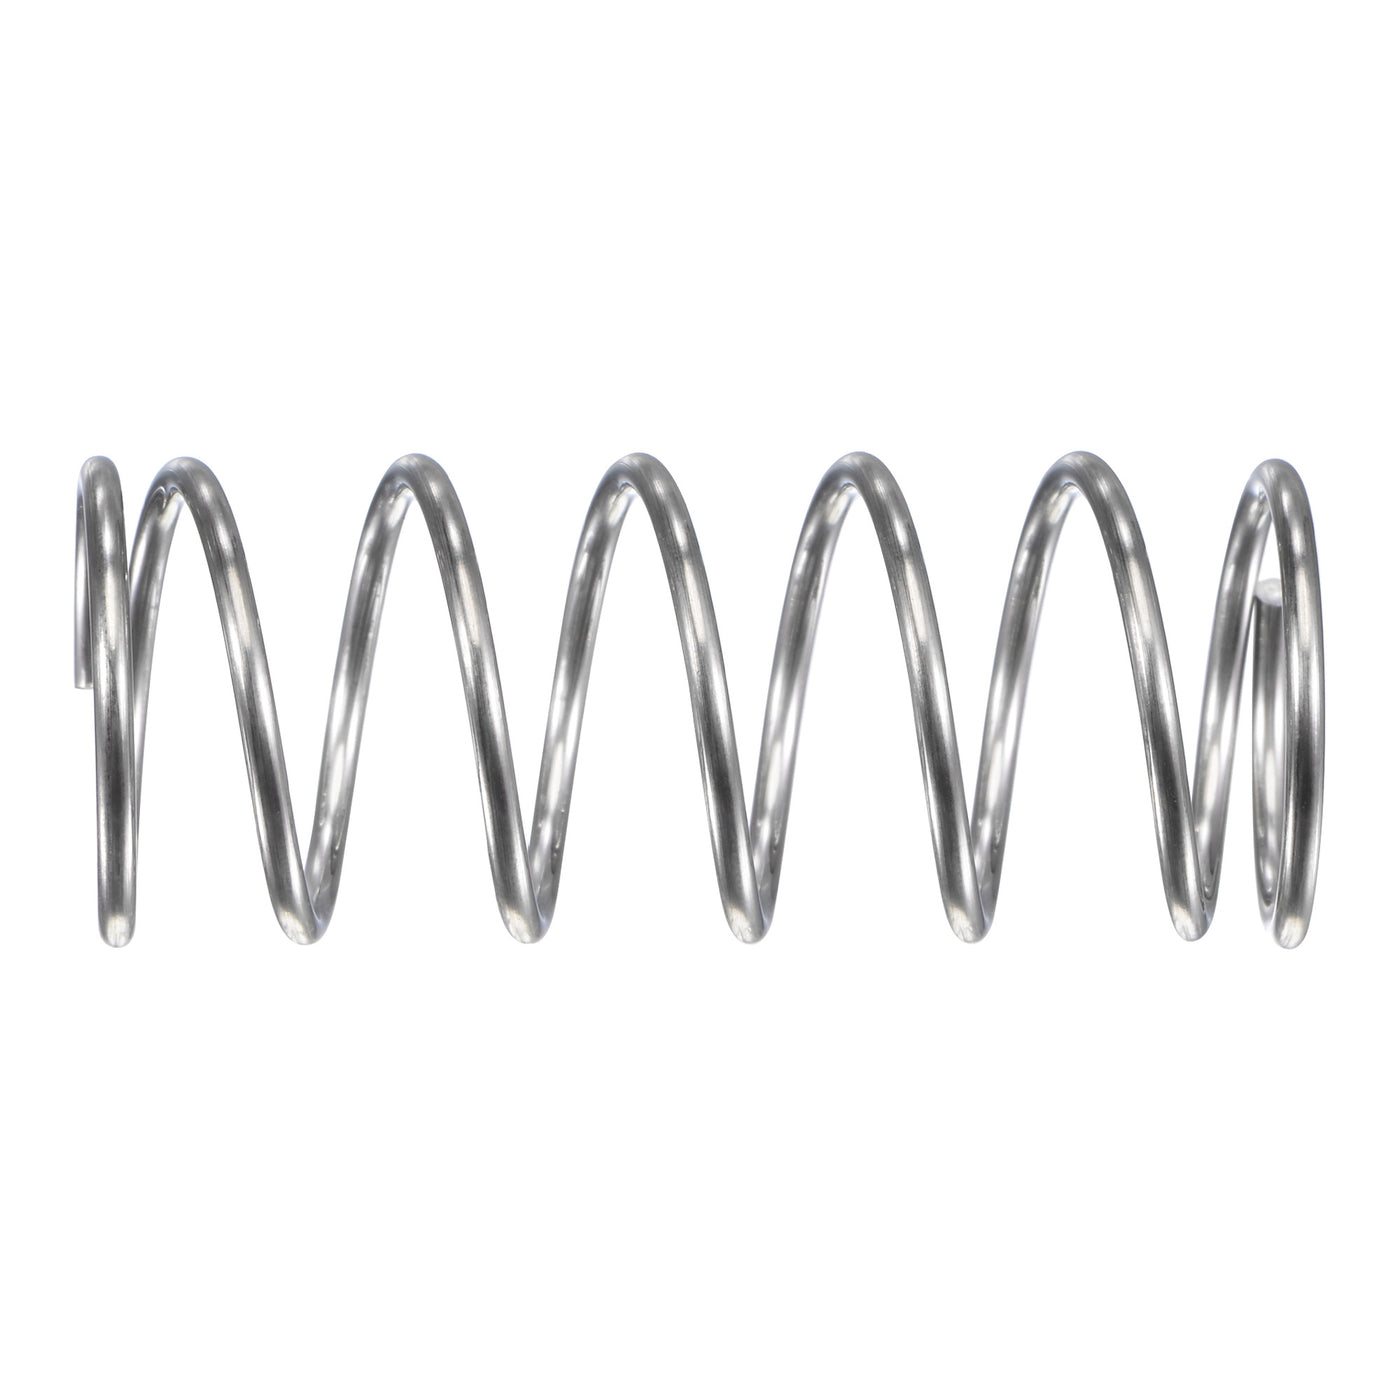 uxcell Uxcell 15mmx1.2mmx40mm 304 Stainless Steel Compression Spring 15.7N Load Capacity 10pcs